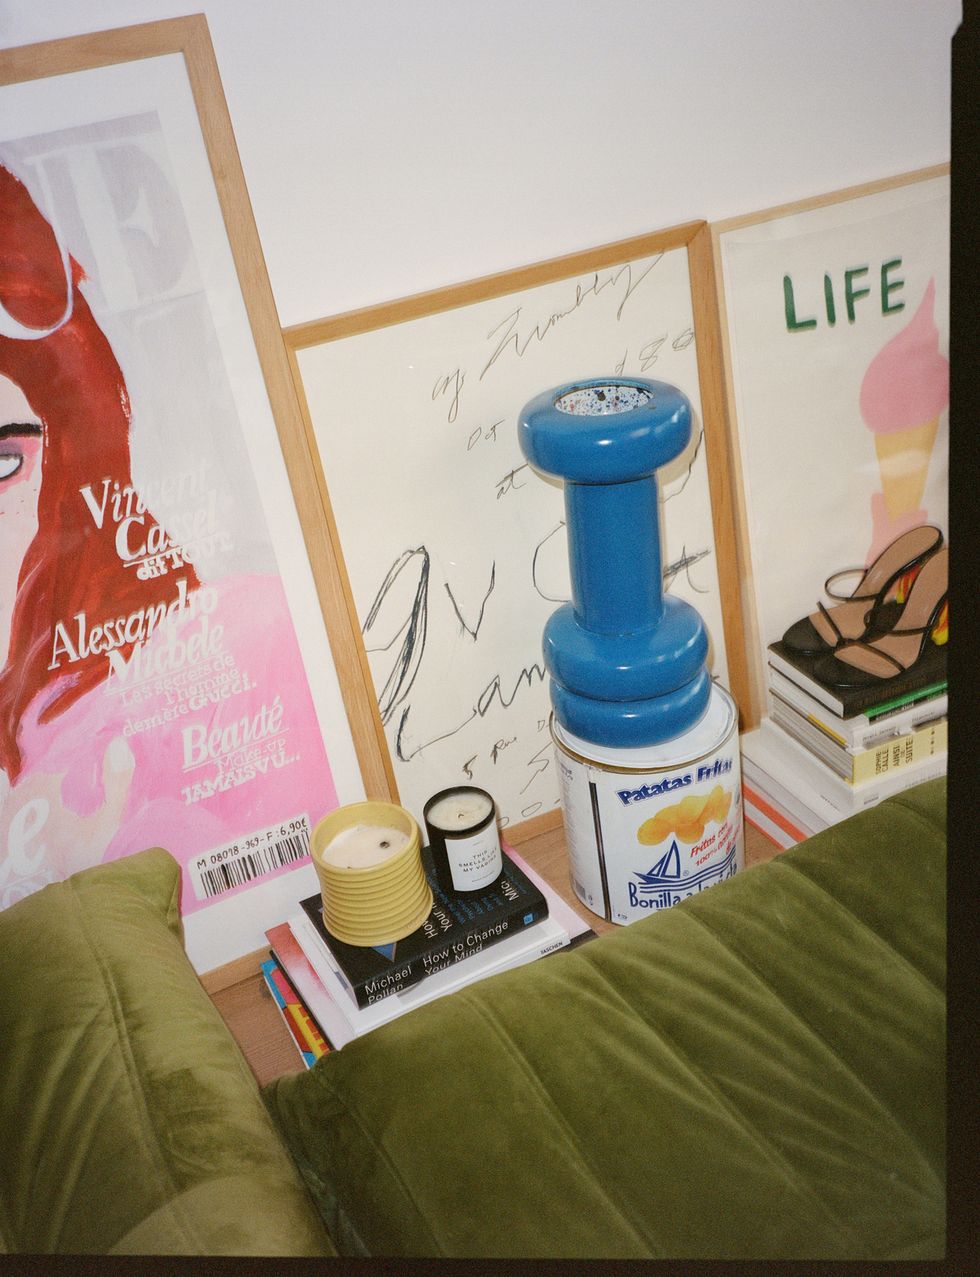 a blue bottle next to a book and a book on a bed